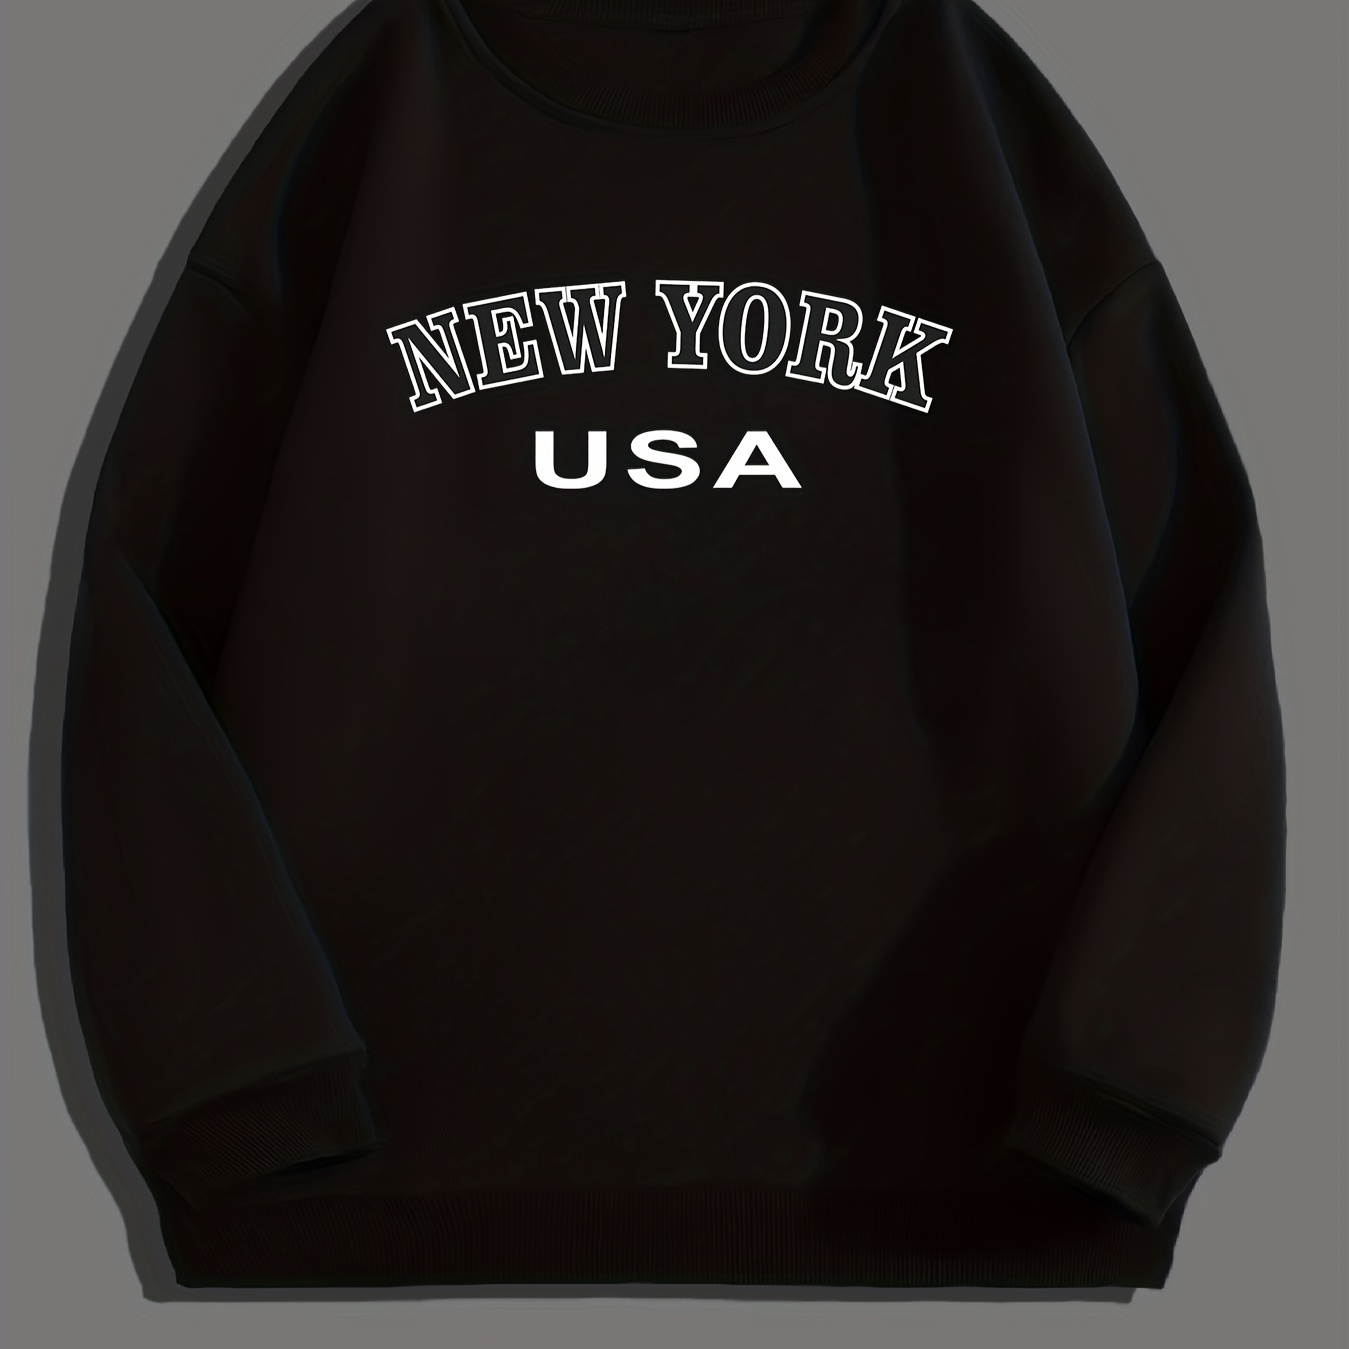 

New York Usa Print, Sweatshirt With Long Sleeves, Men's Creative Slightly Flex Crew Neck Pullover For Spring Fall And Winter